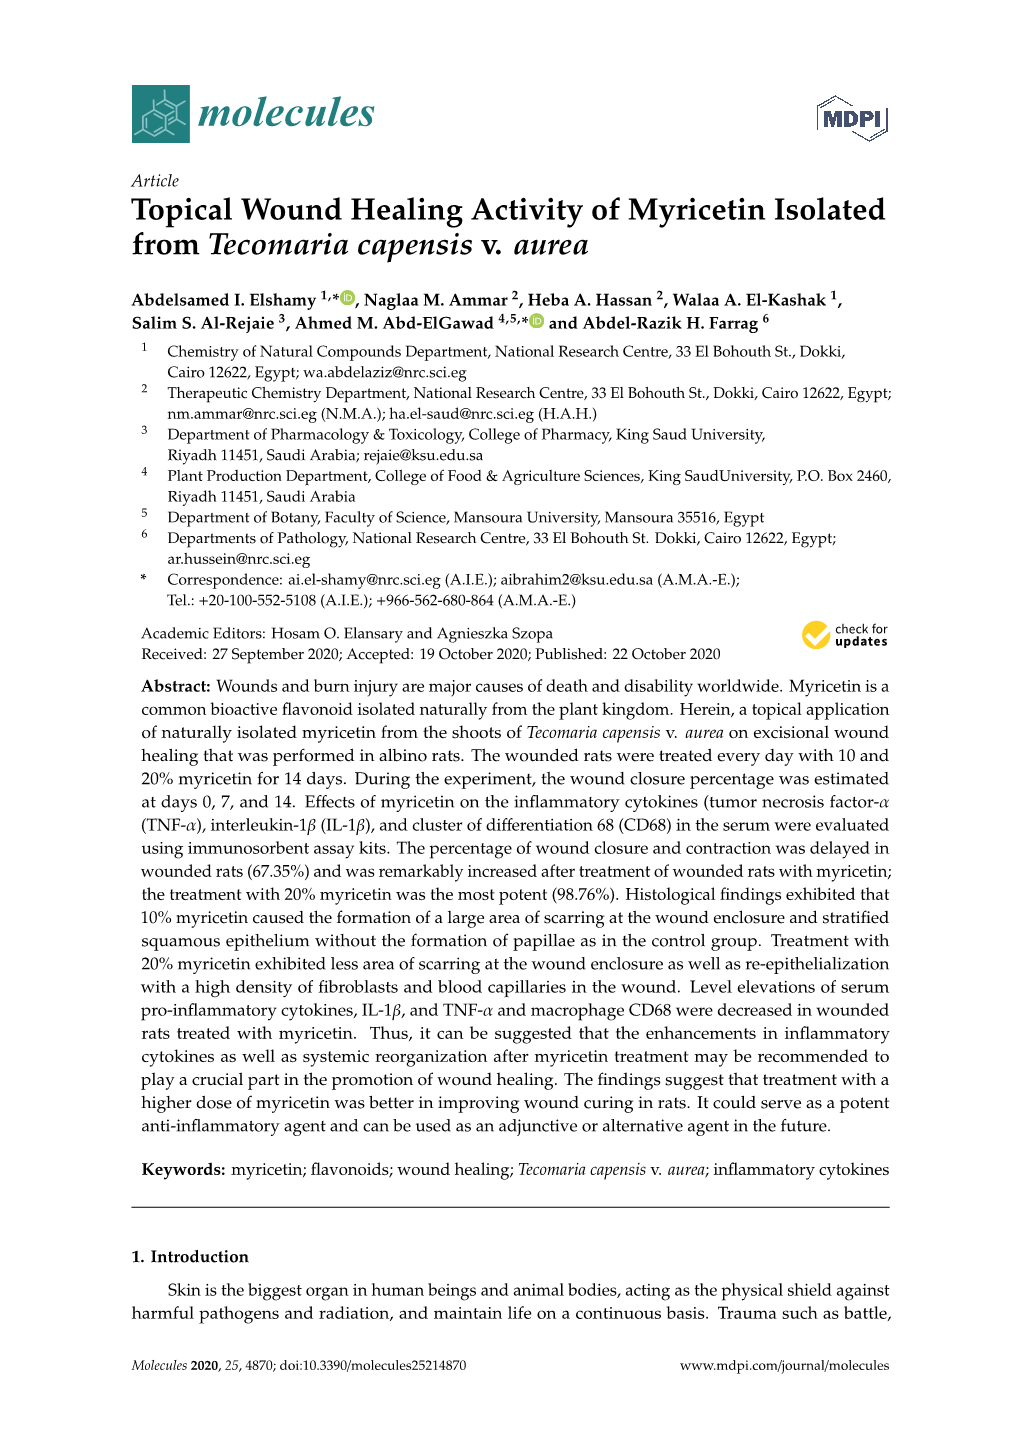 Topical Wound Healing Activity of Myricetin Isolated from Tecomaria Capensis V